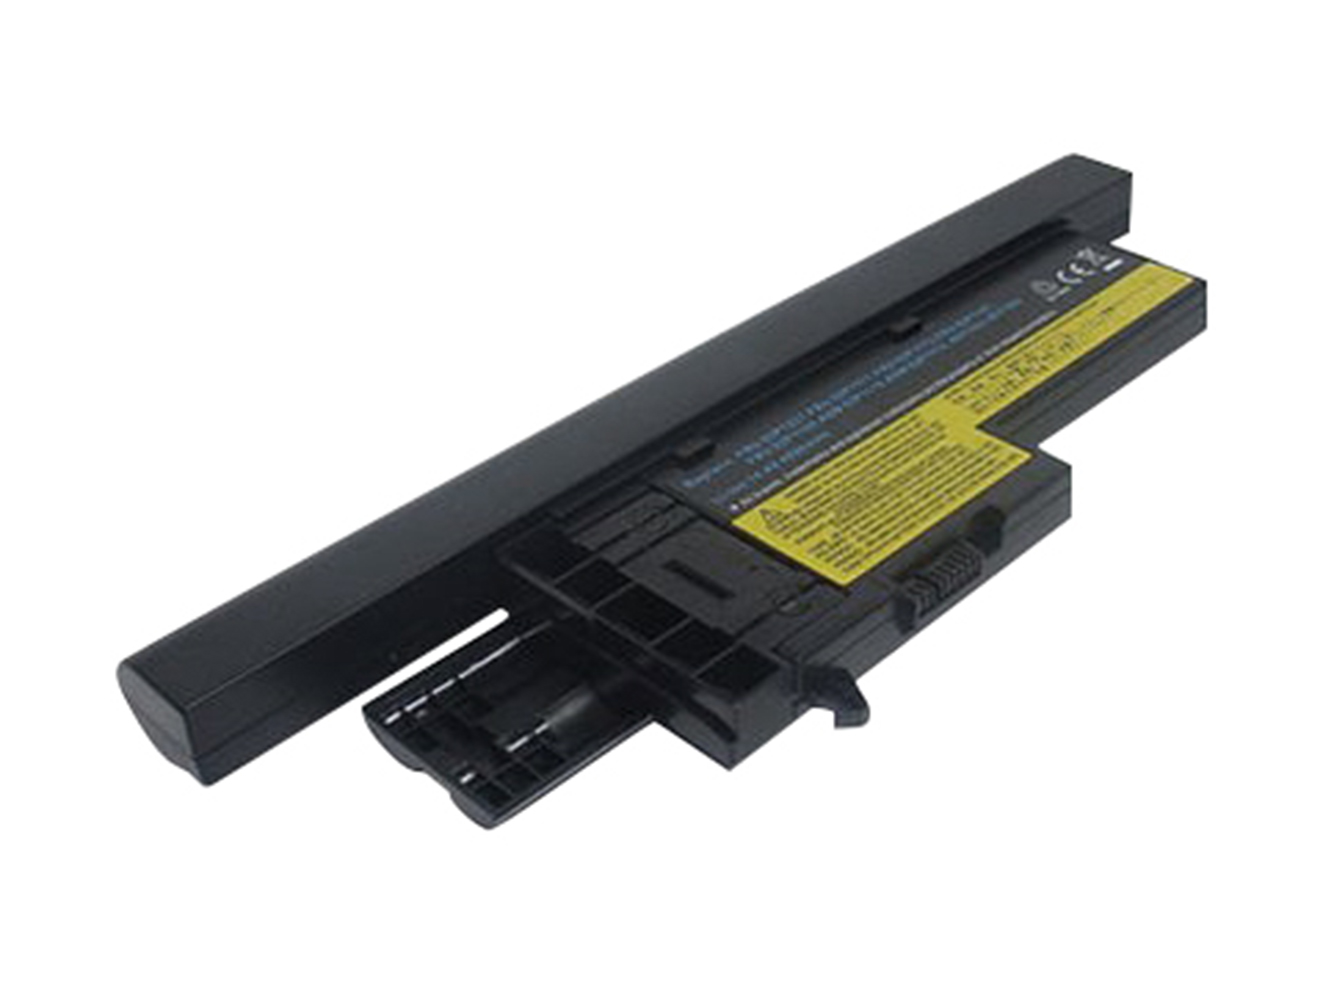 Replacement for LENOVO ThinkPad X61, ThinkPad X61s Series Laptop Battery